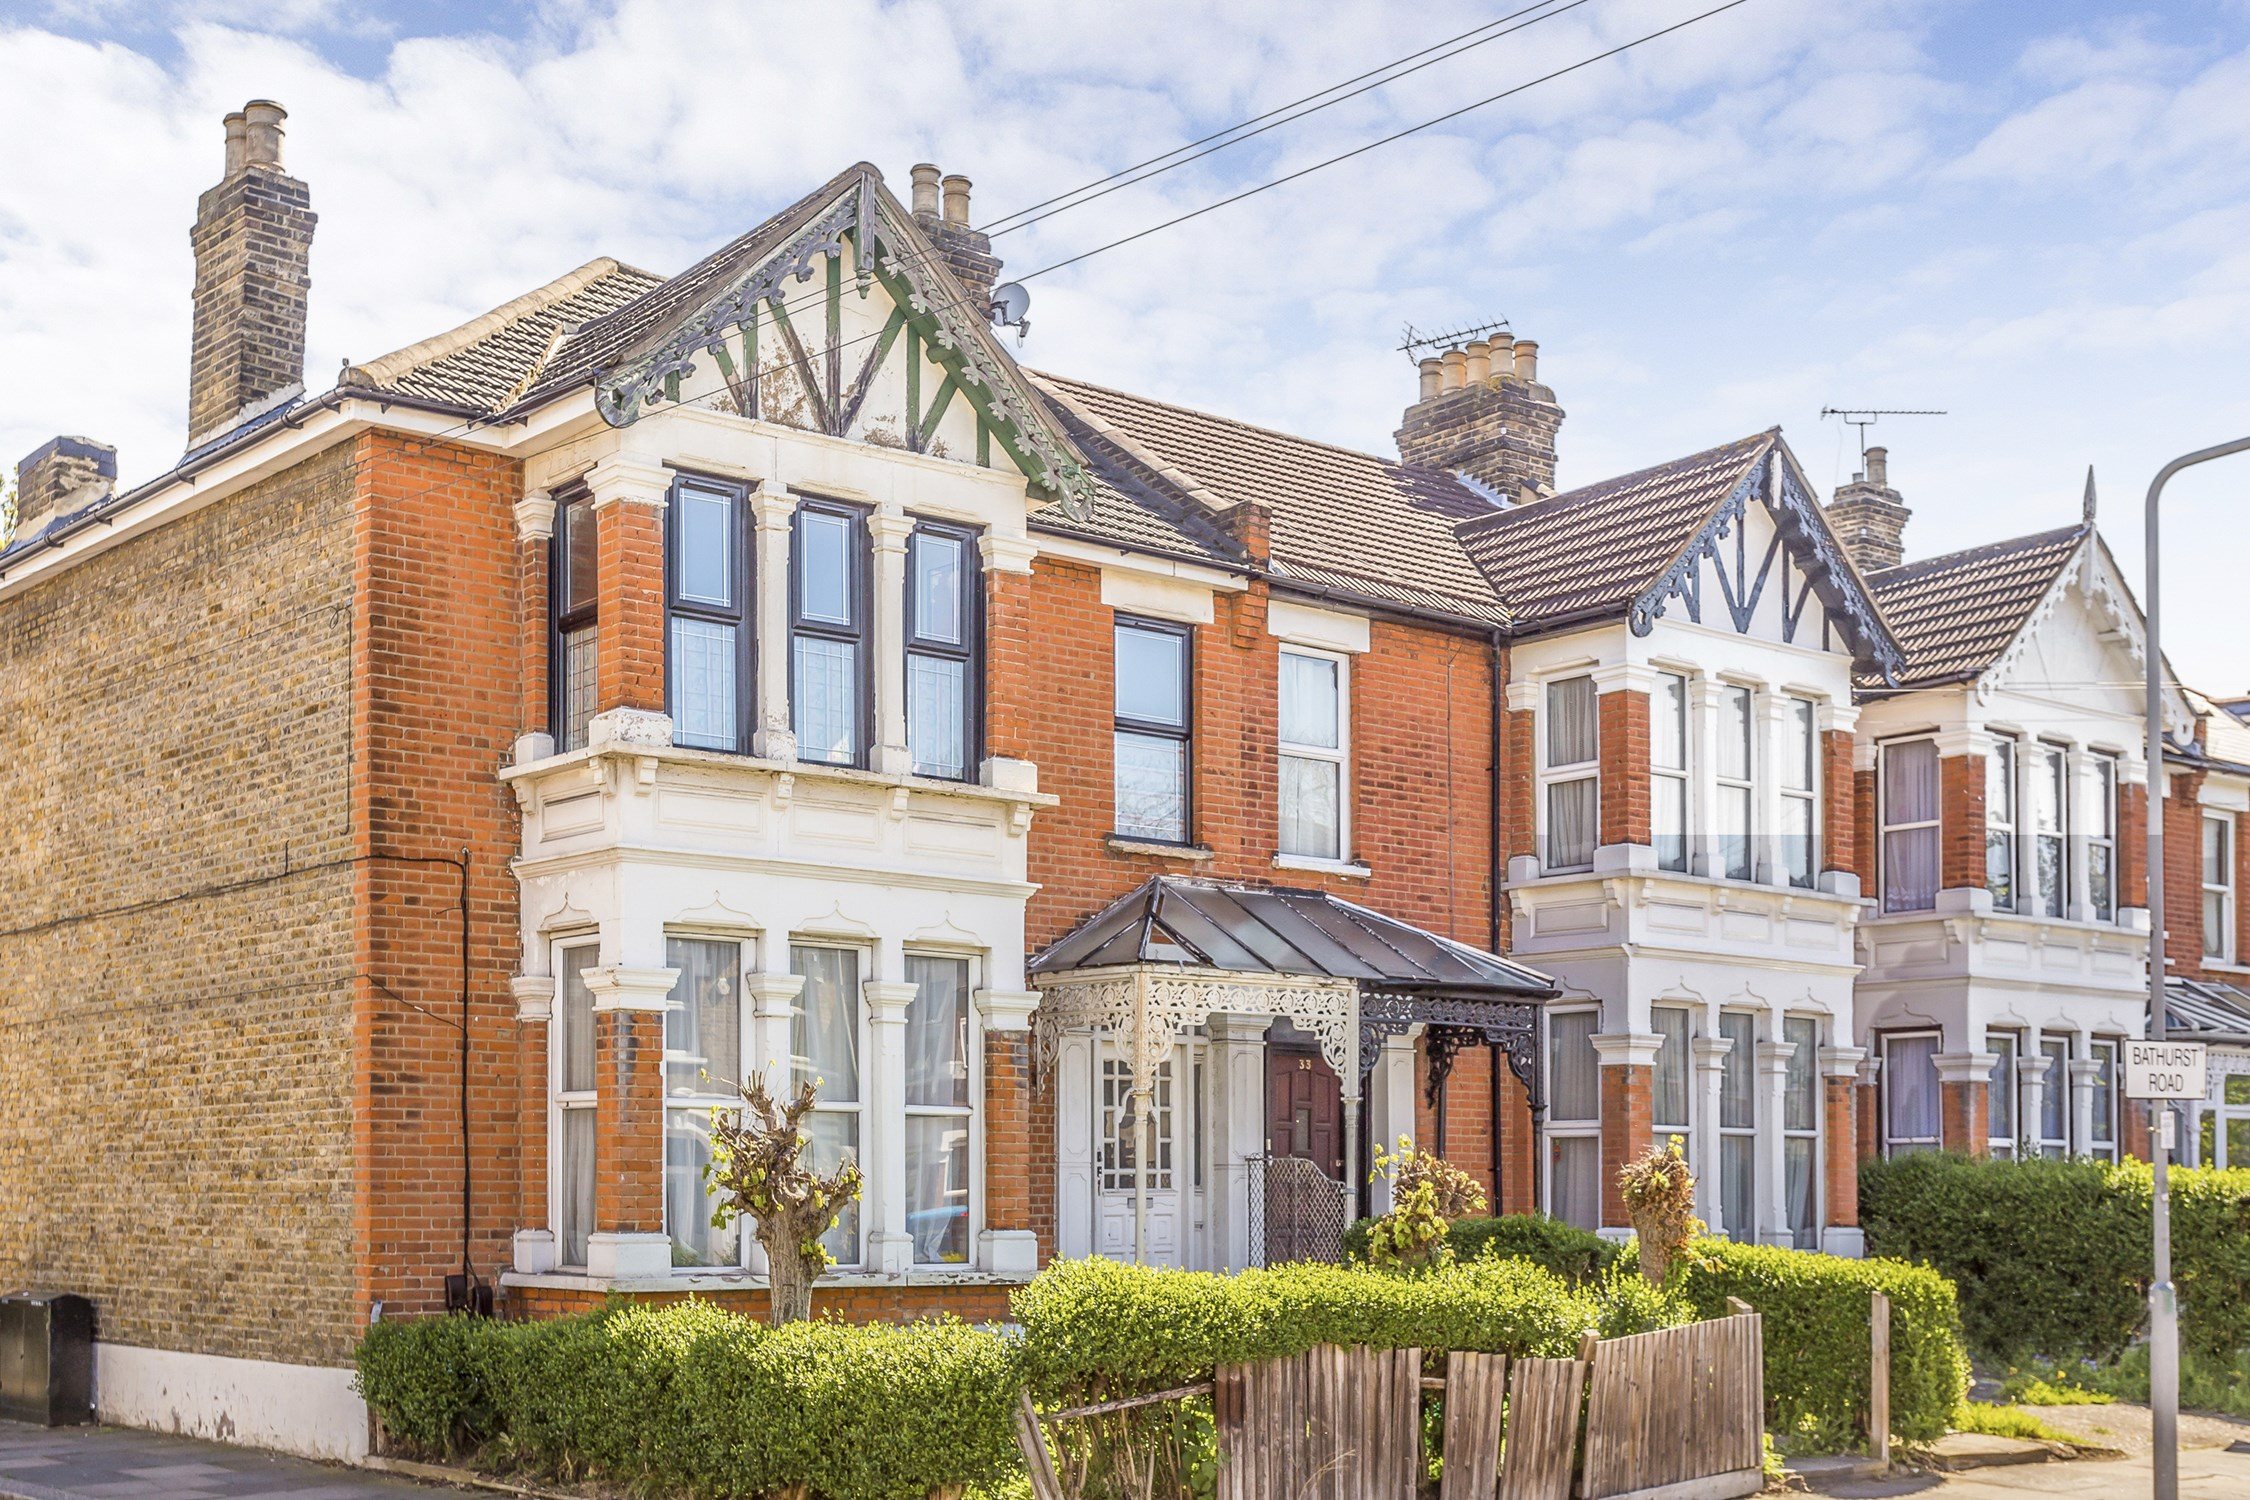 Why Ilford Is An Ideal Location For Home-Buyers